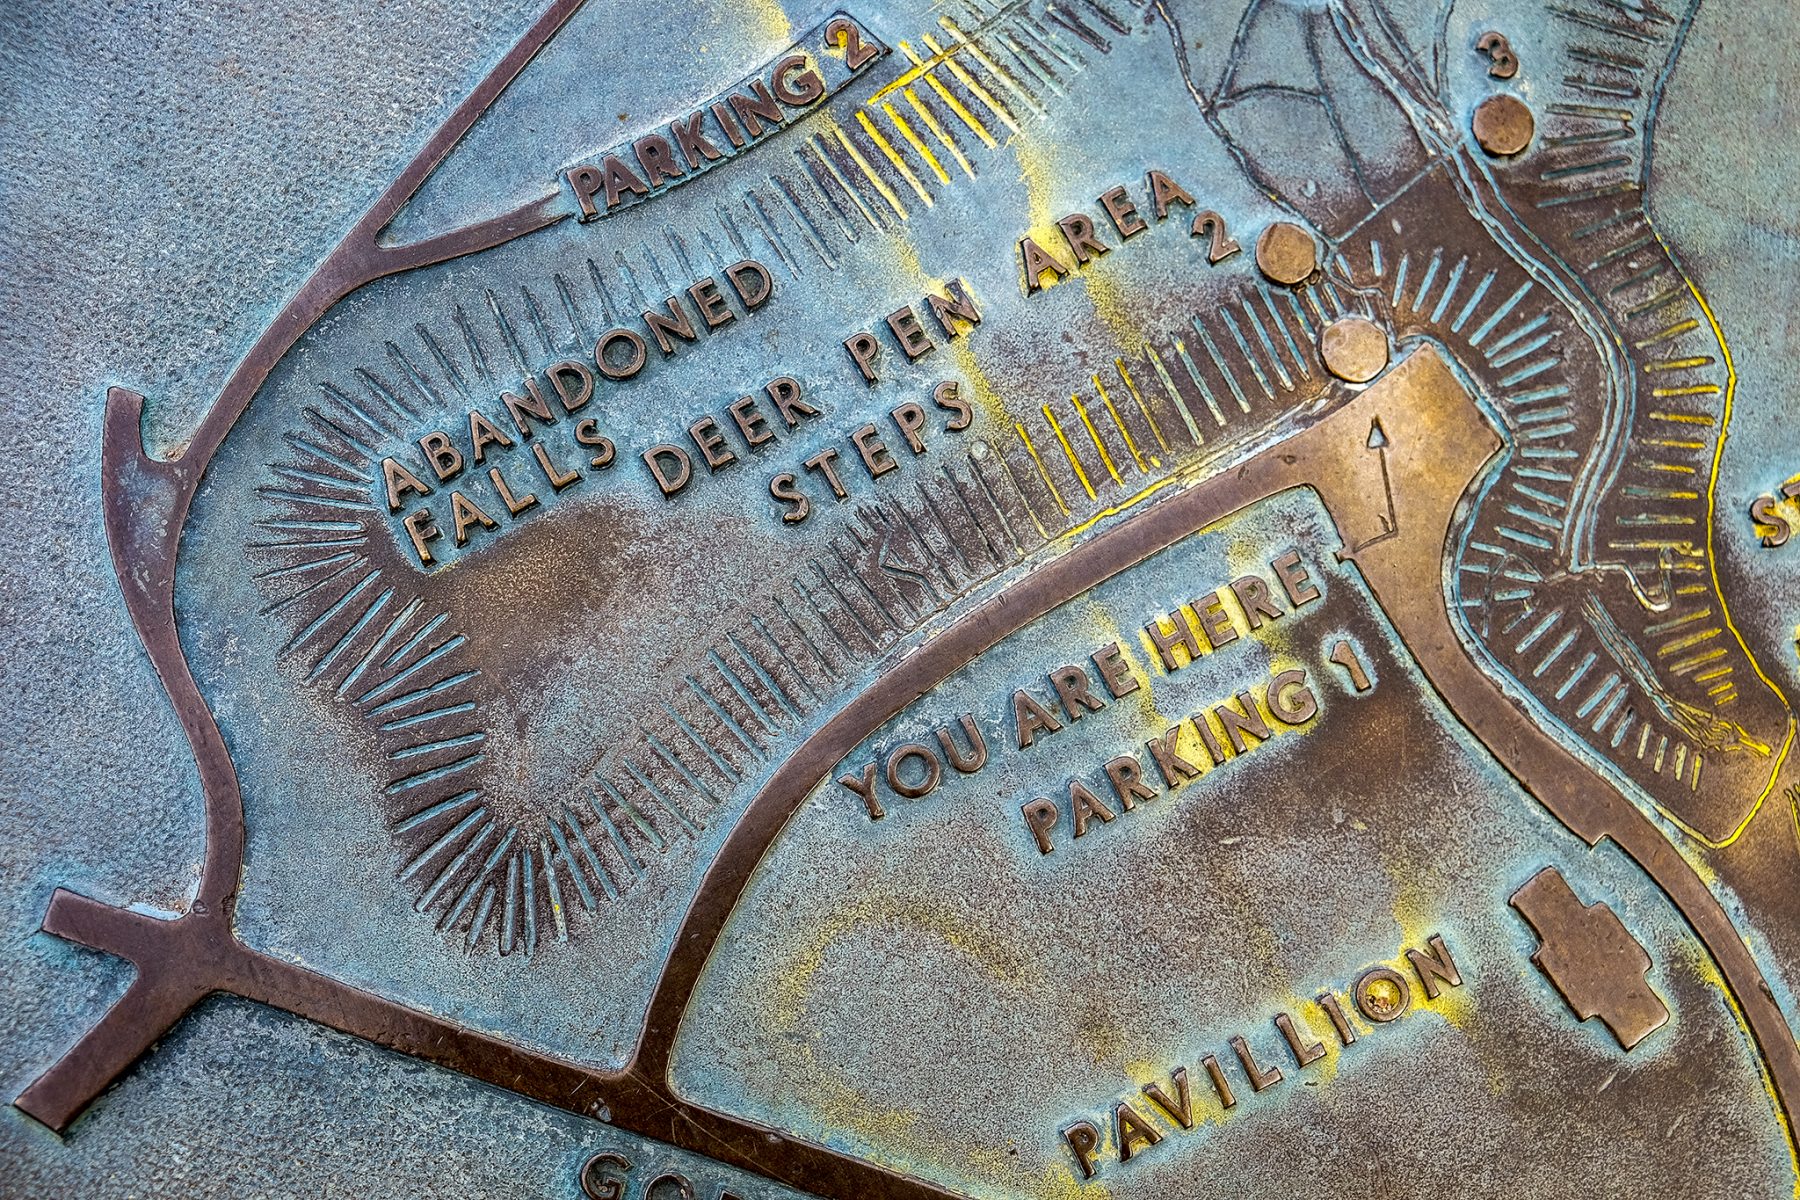 An oxidized bronze plaque by Bridge No. 2 in Minnehaha Park indicates where you are on a map.